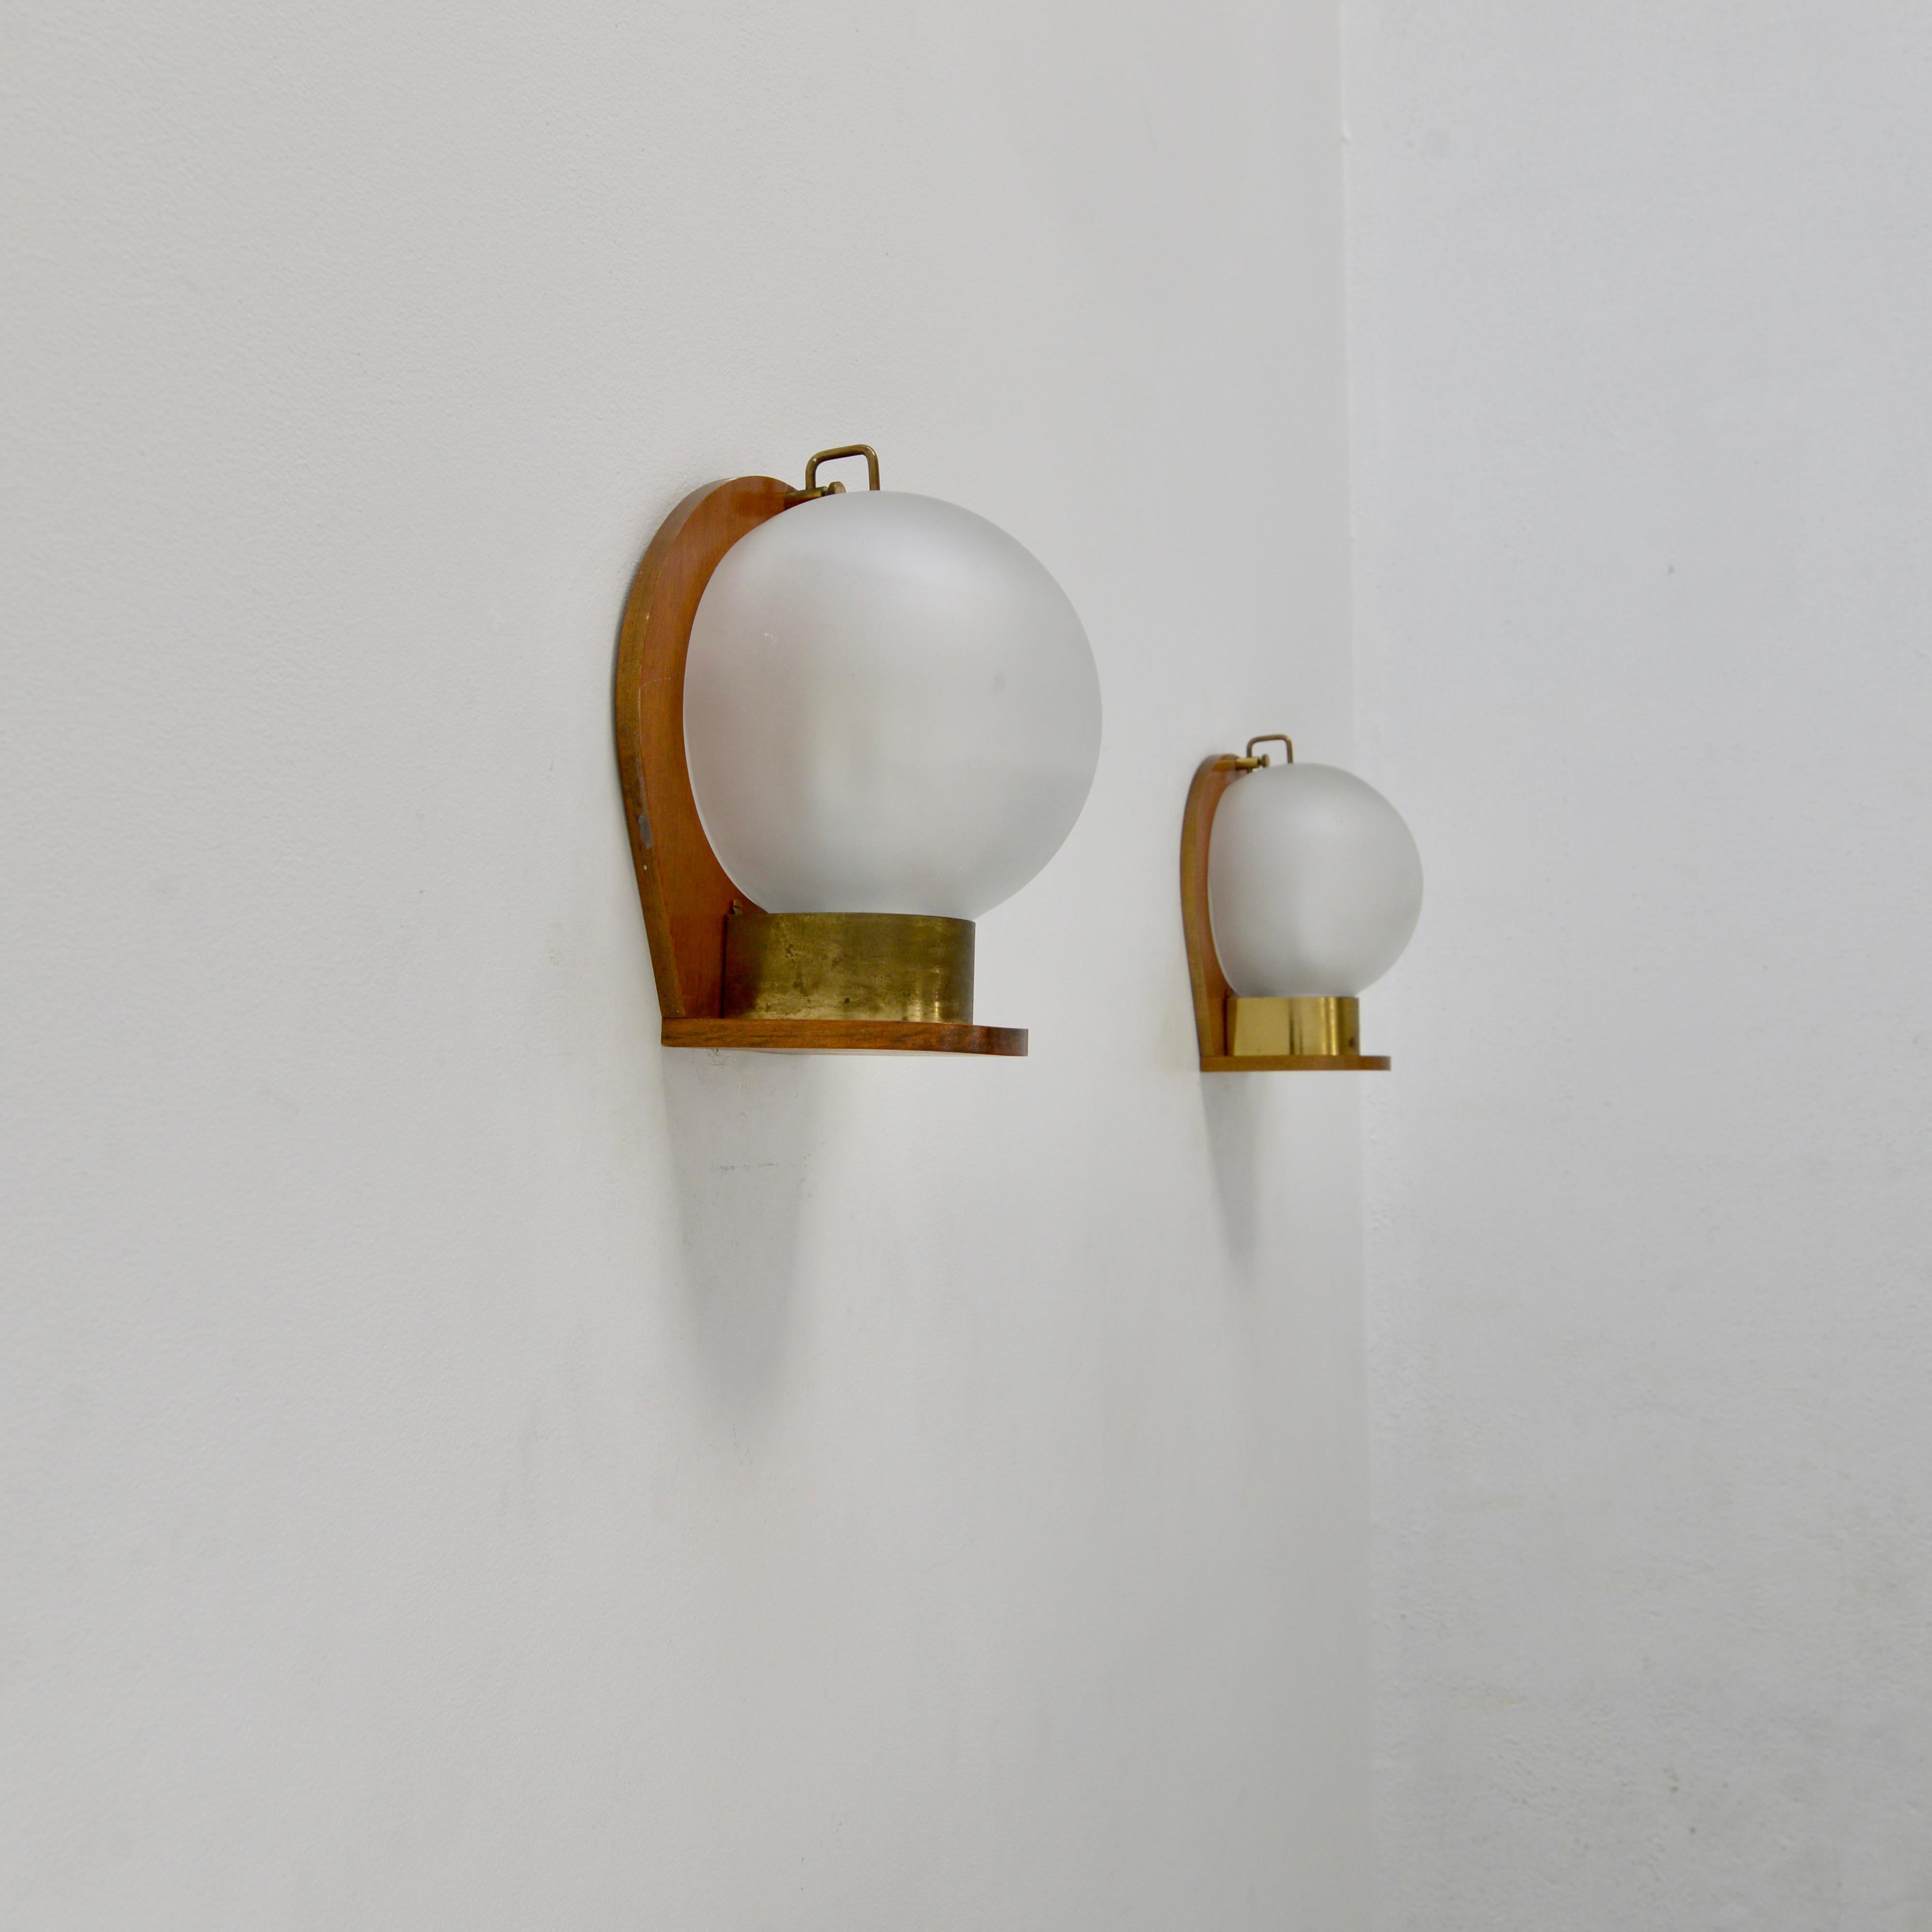 Wonderfully rustic wood and brass glass sconce from 1950s Italy. Original finish and satin clear glass. Partially restored with (1) E26 medium based socket per sconce. Wired for use in the US. Lightbulb included with order. 
Measurements:
Height